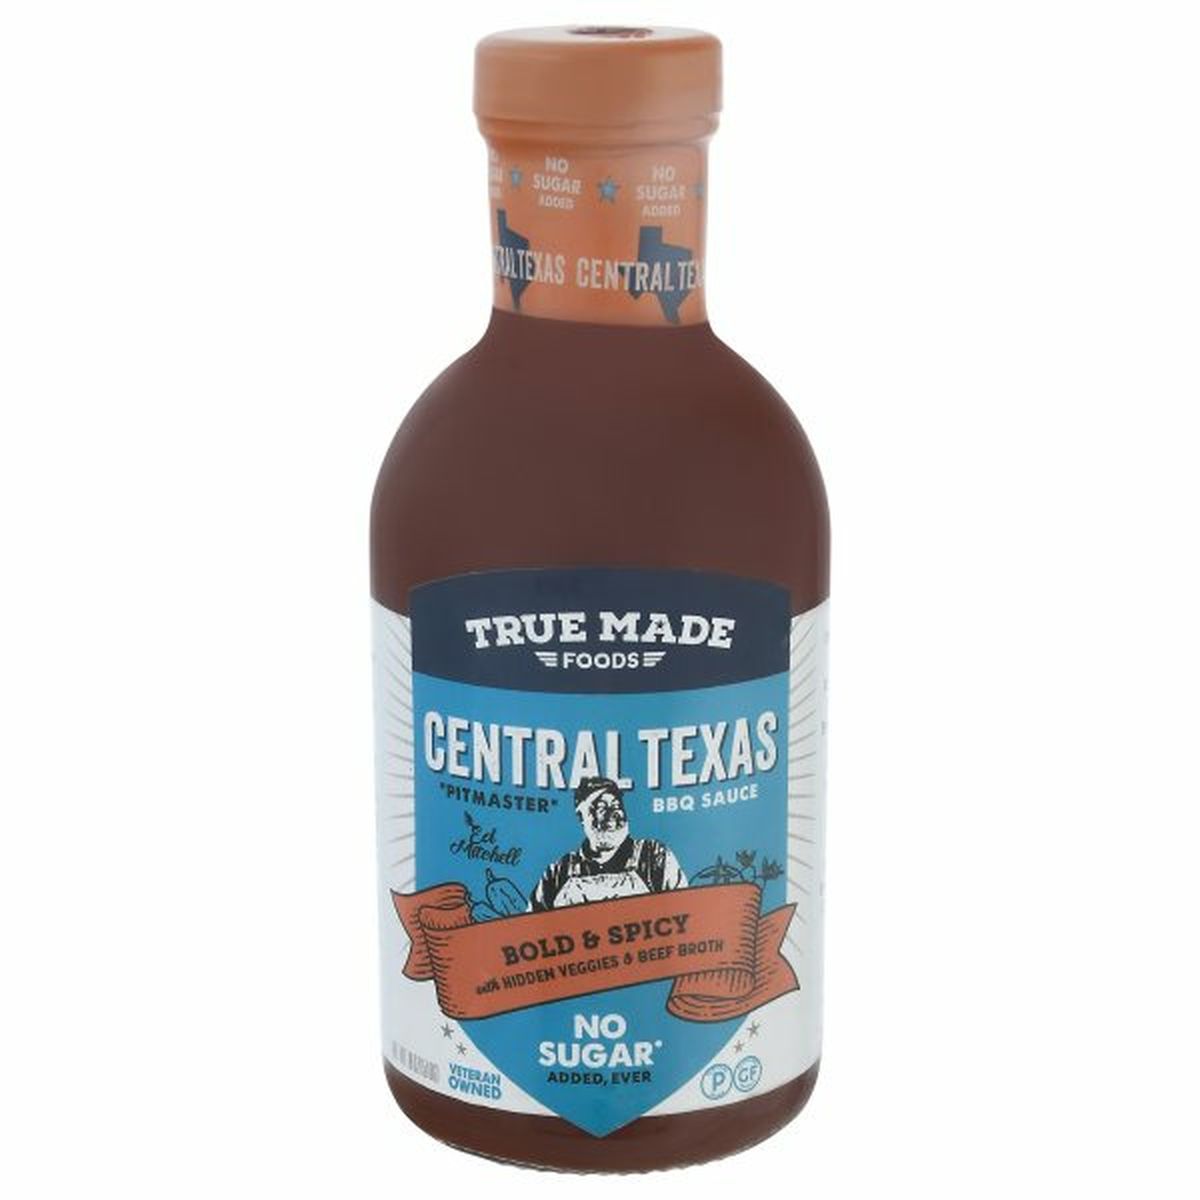 Calories in True Made Foods BBQ Sauce, Central Texas